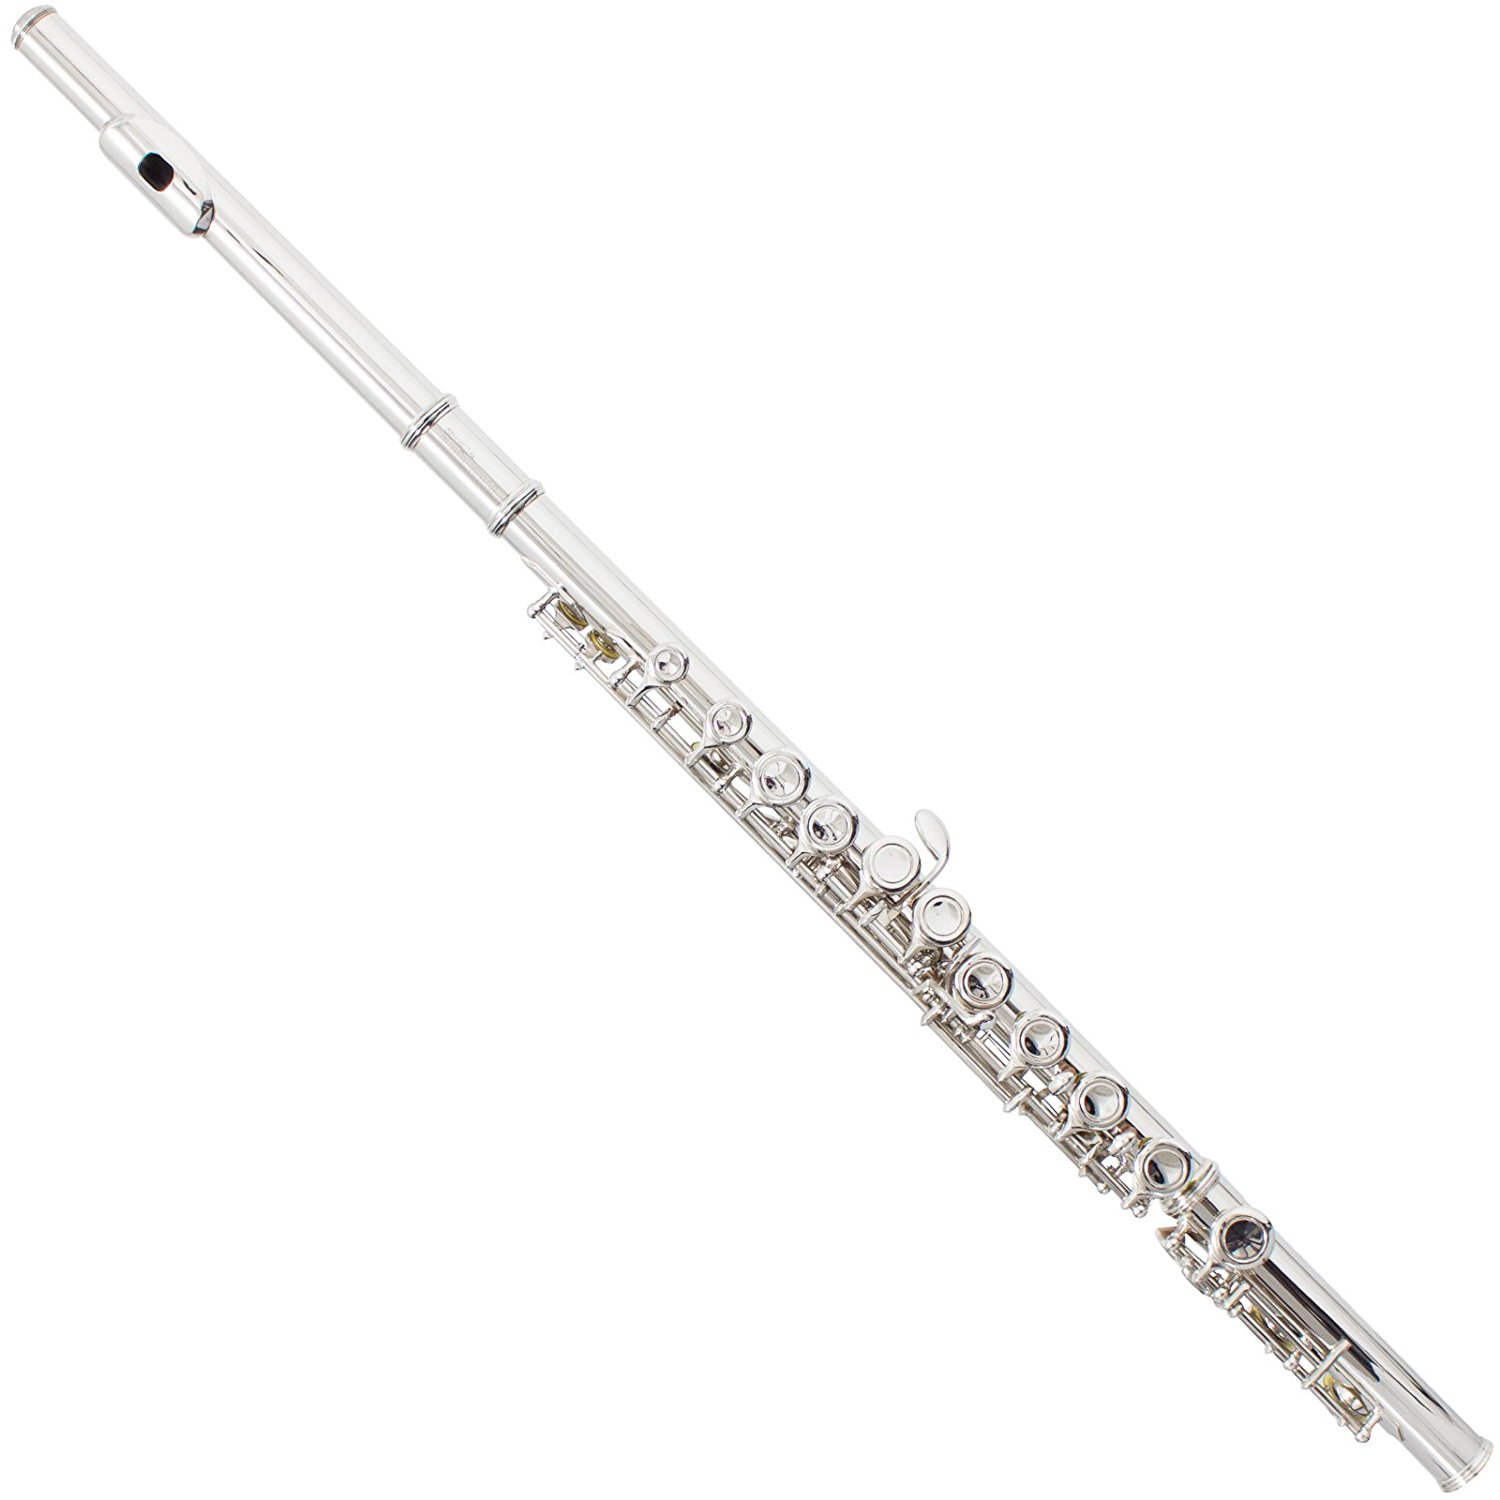 The 5 Best Flute Brands for Beginners of 2018 (Reviews)